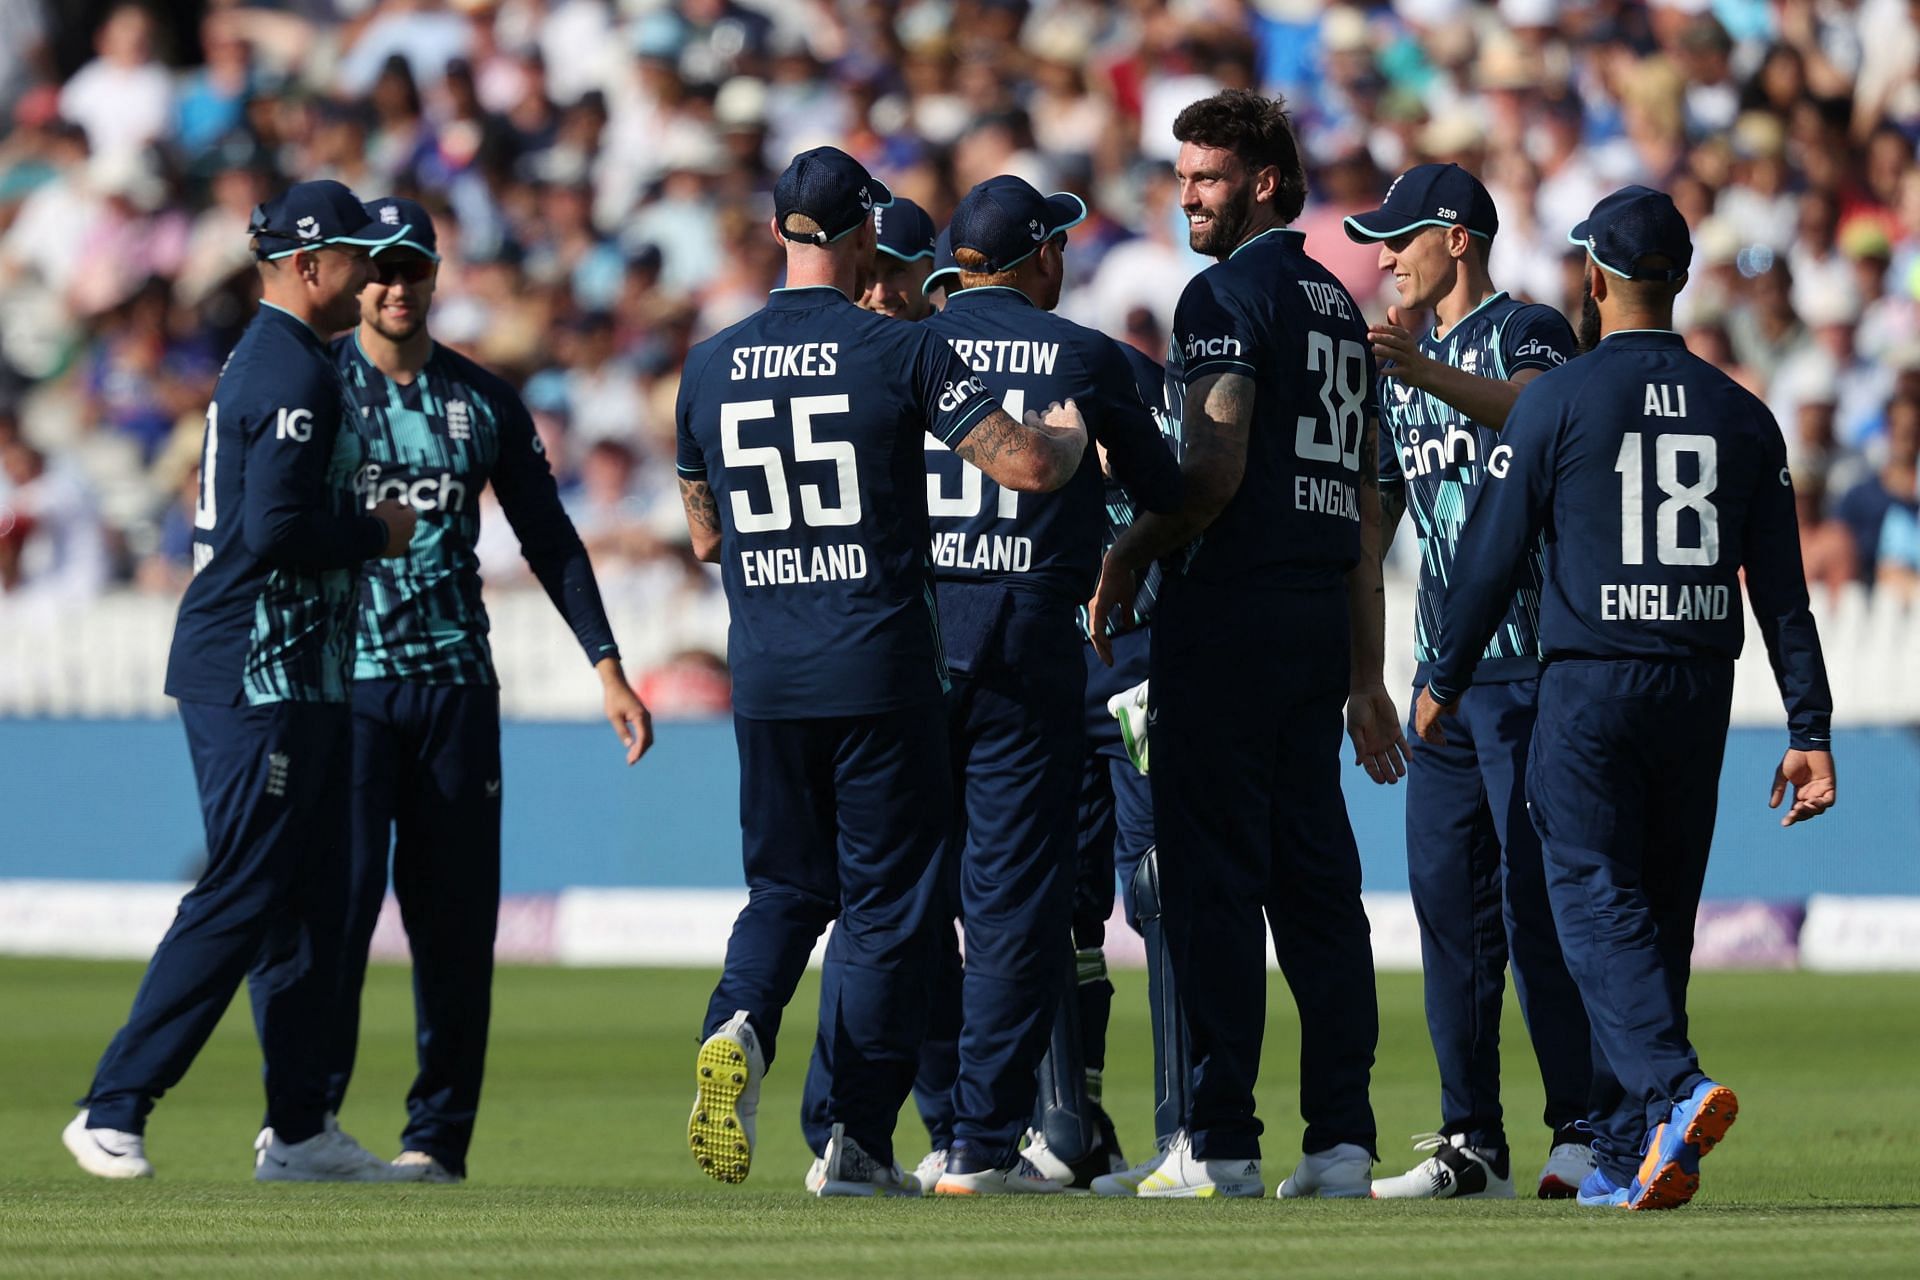 England won the second ODI against India by 100 runs. (Credits: Getty)